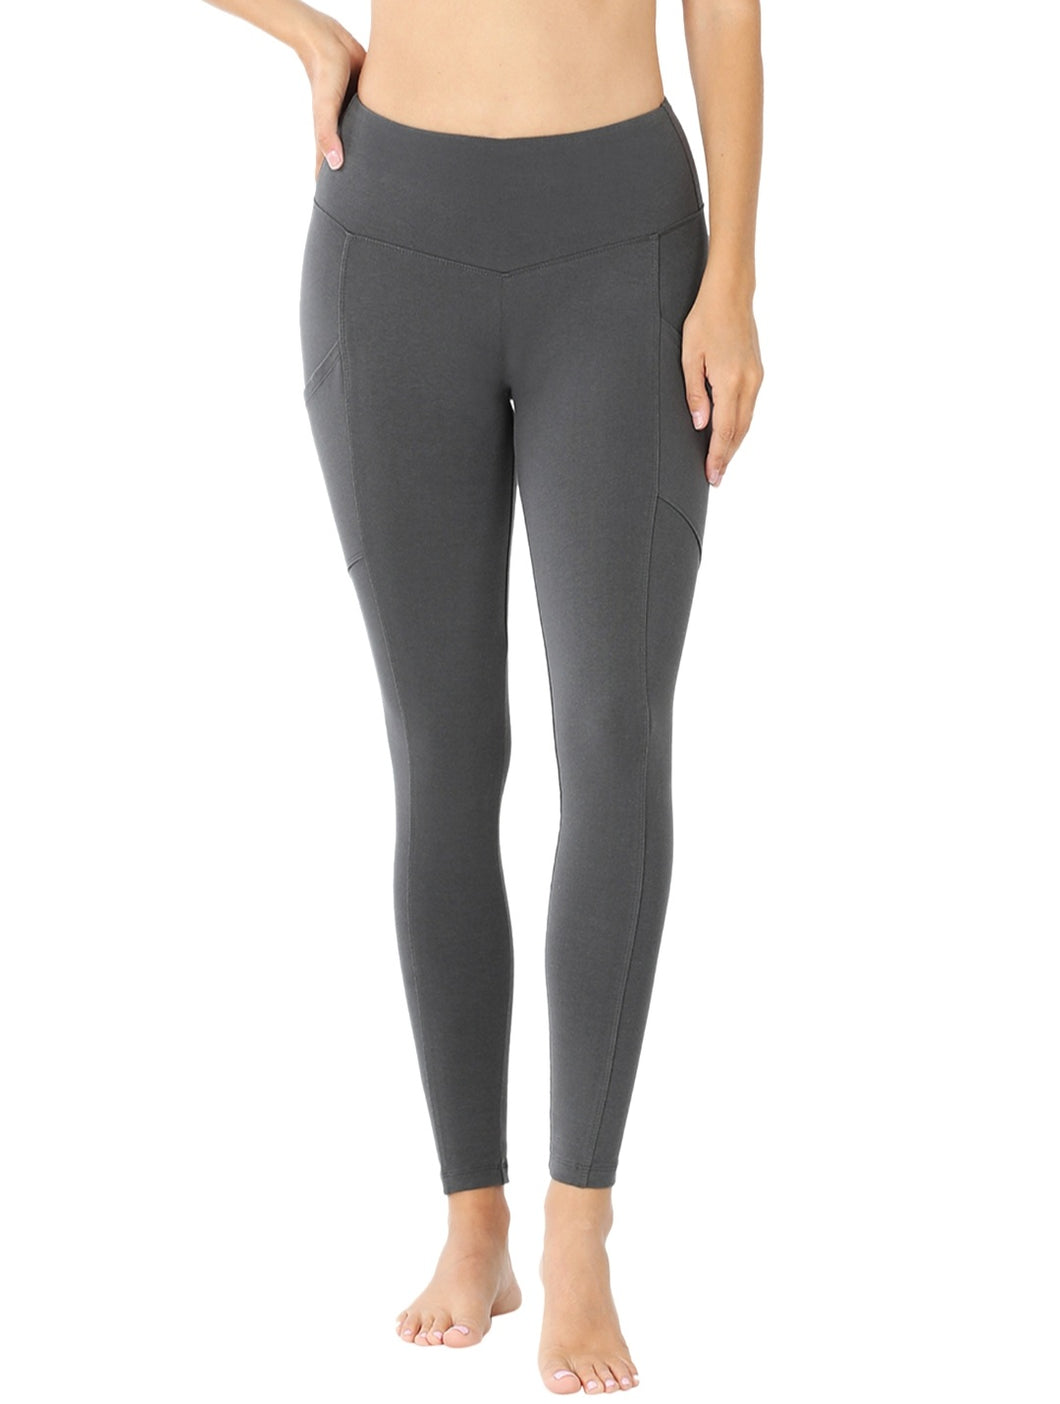 Charcoal buttery Leggings with pockets